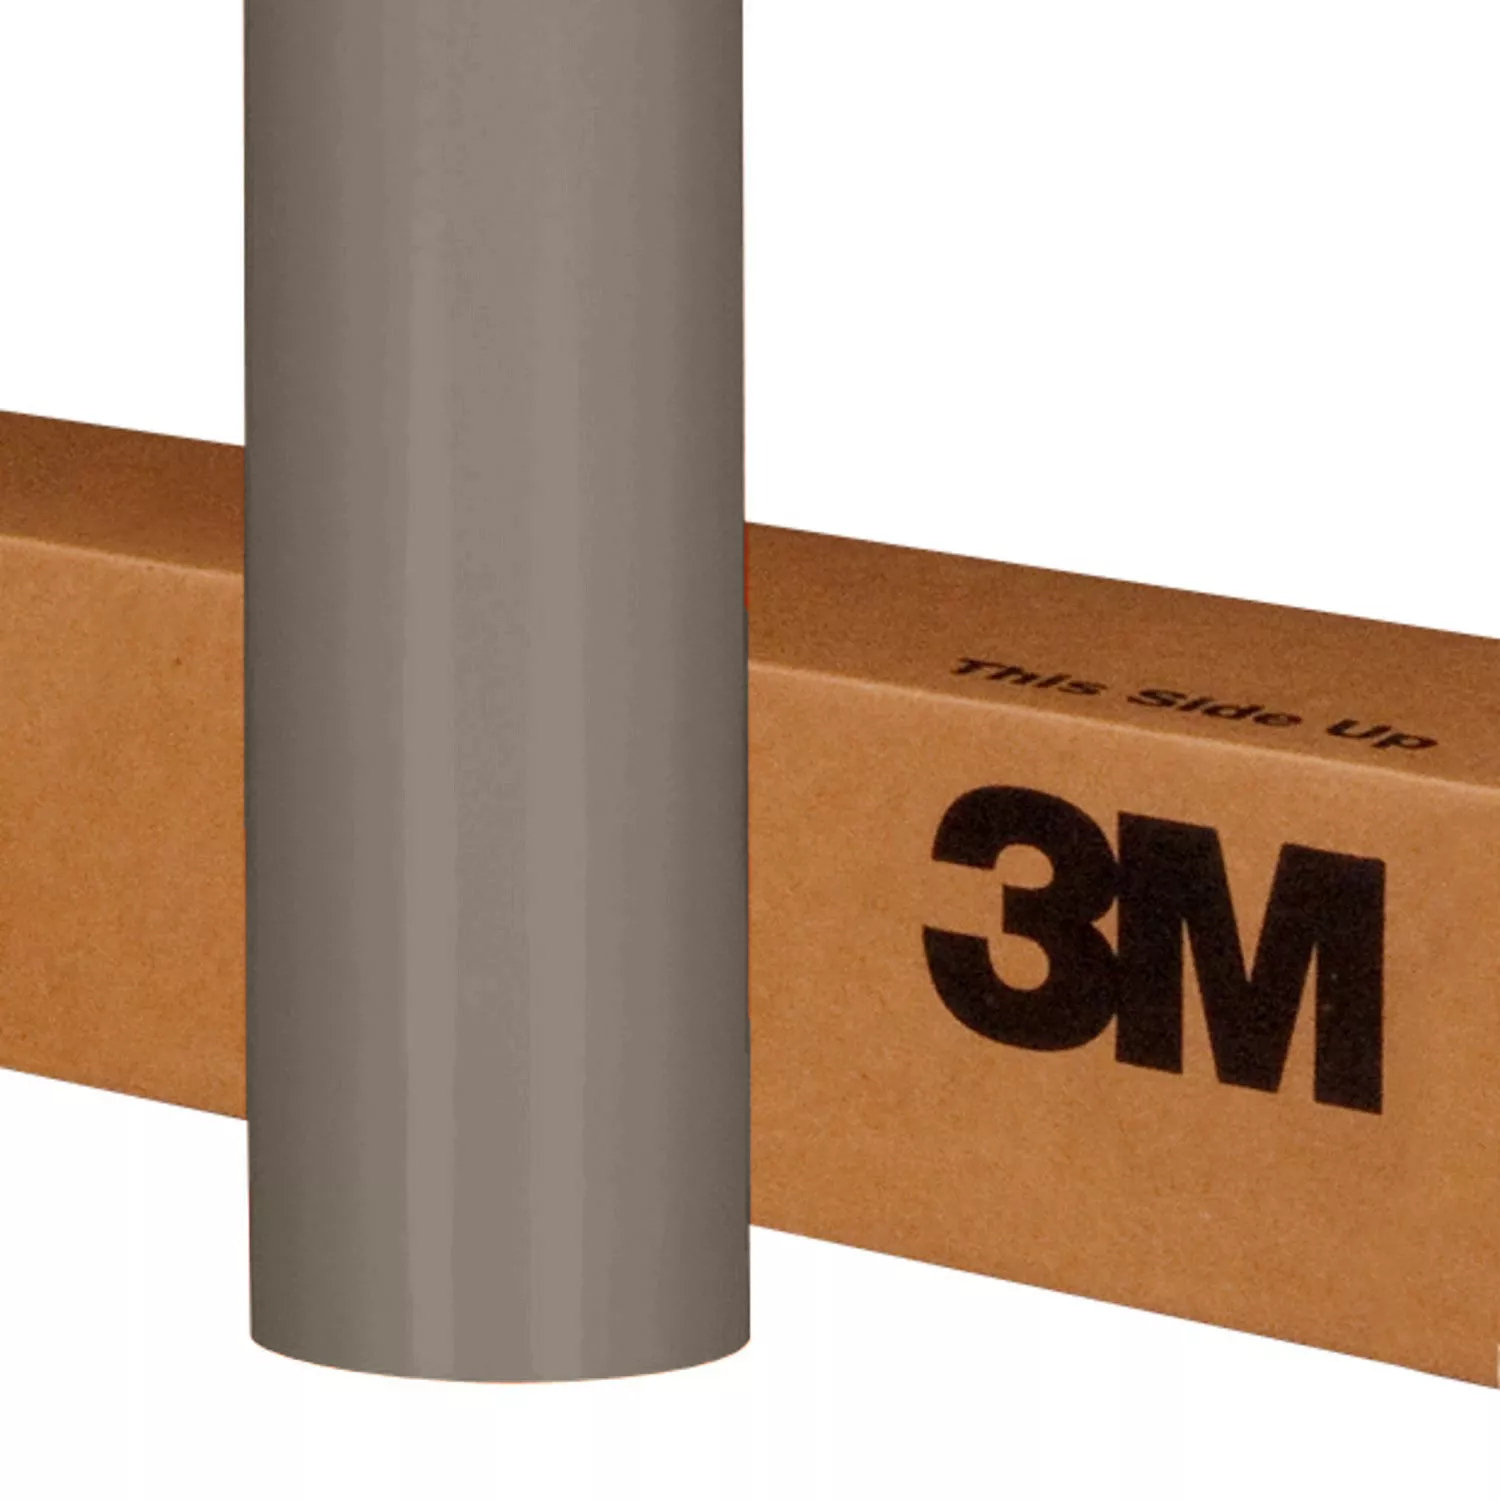 3M™ Scotchcal™ ElectroCut™ Graphic Film 7725-91, Dove Gray, 48 in x 50
yd